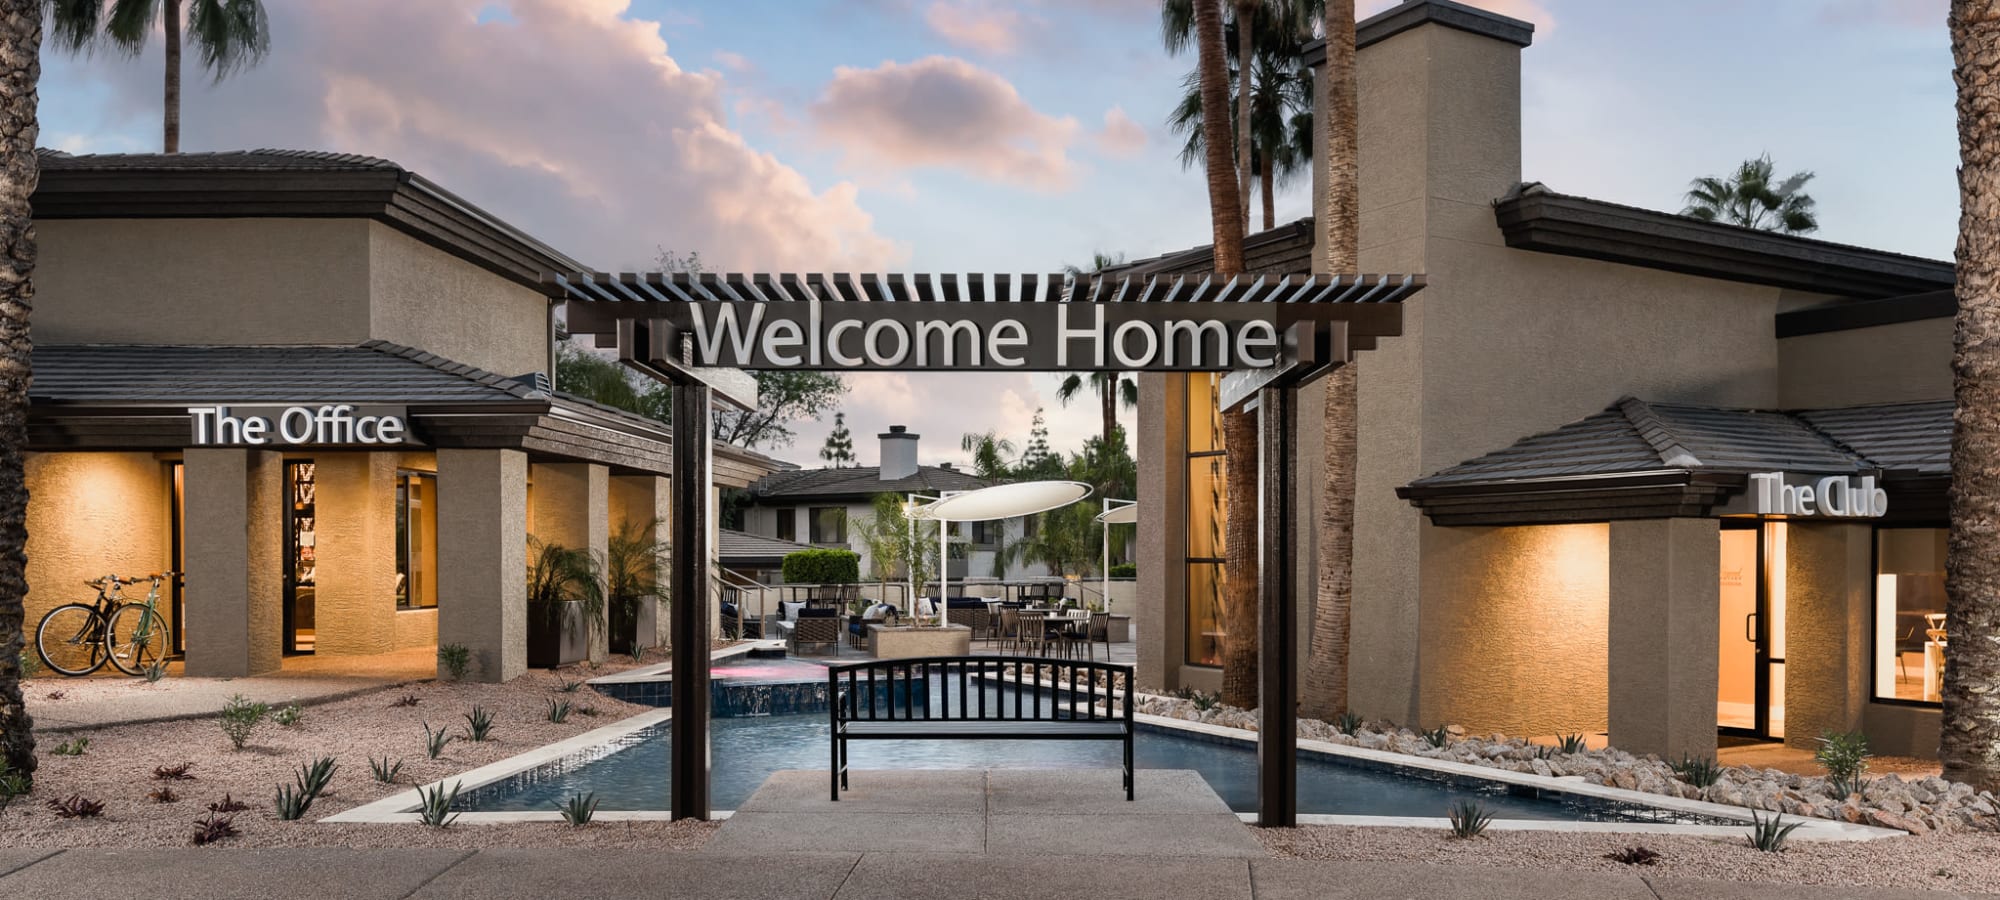 Beautiful exterior photo close to sunset on a partially cloudy day at Elite North Scottsdale in Scottsdale, Arizona